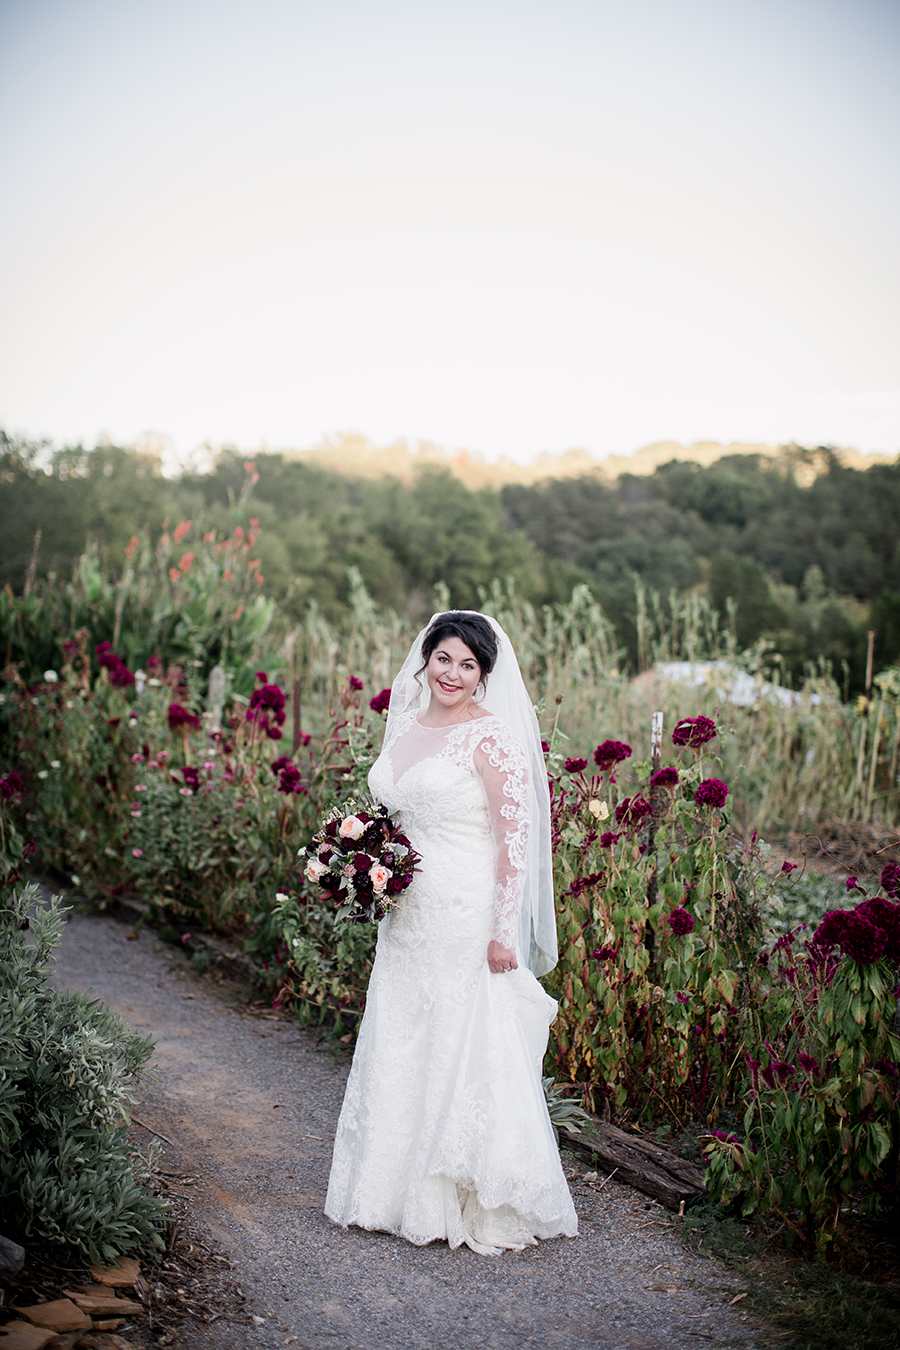 Standing in front of maroon wild flowers at this bridal session at The Barn at High Point Farms by Knoxville Wedding Photographer, Amanda May Photos.